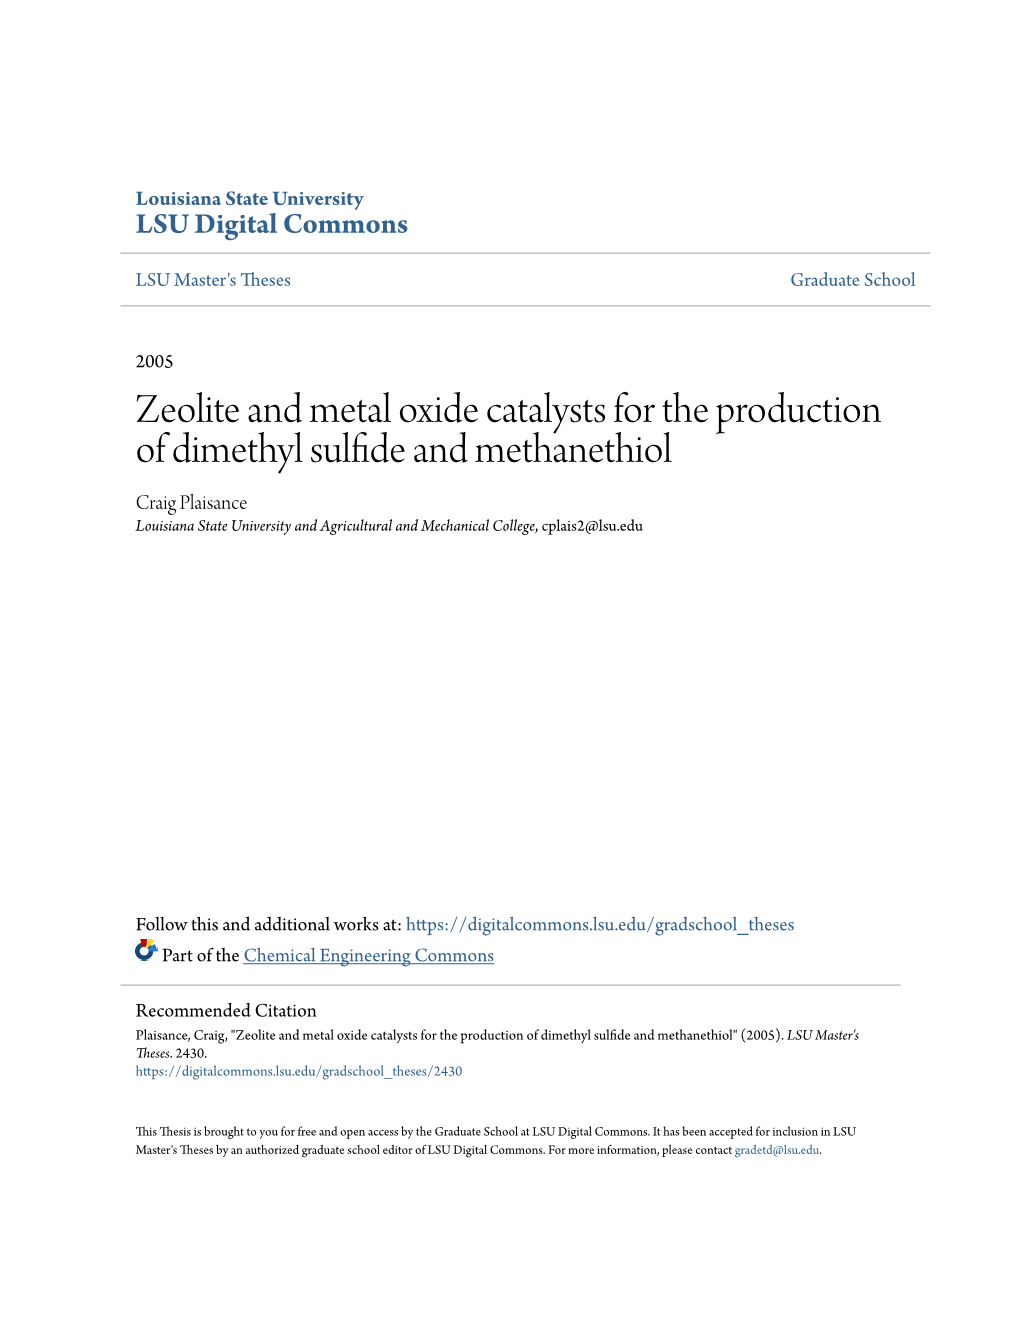 Zeolite and Metal Oxide Catalysts for the Production of Dimethyl Sulfide and Methanethiol